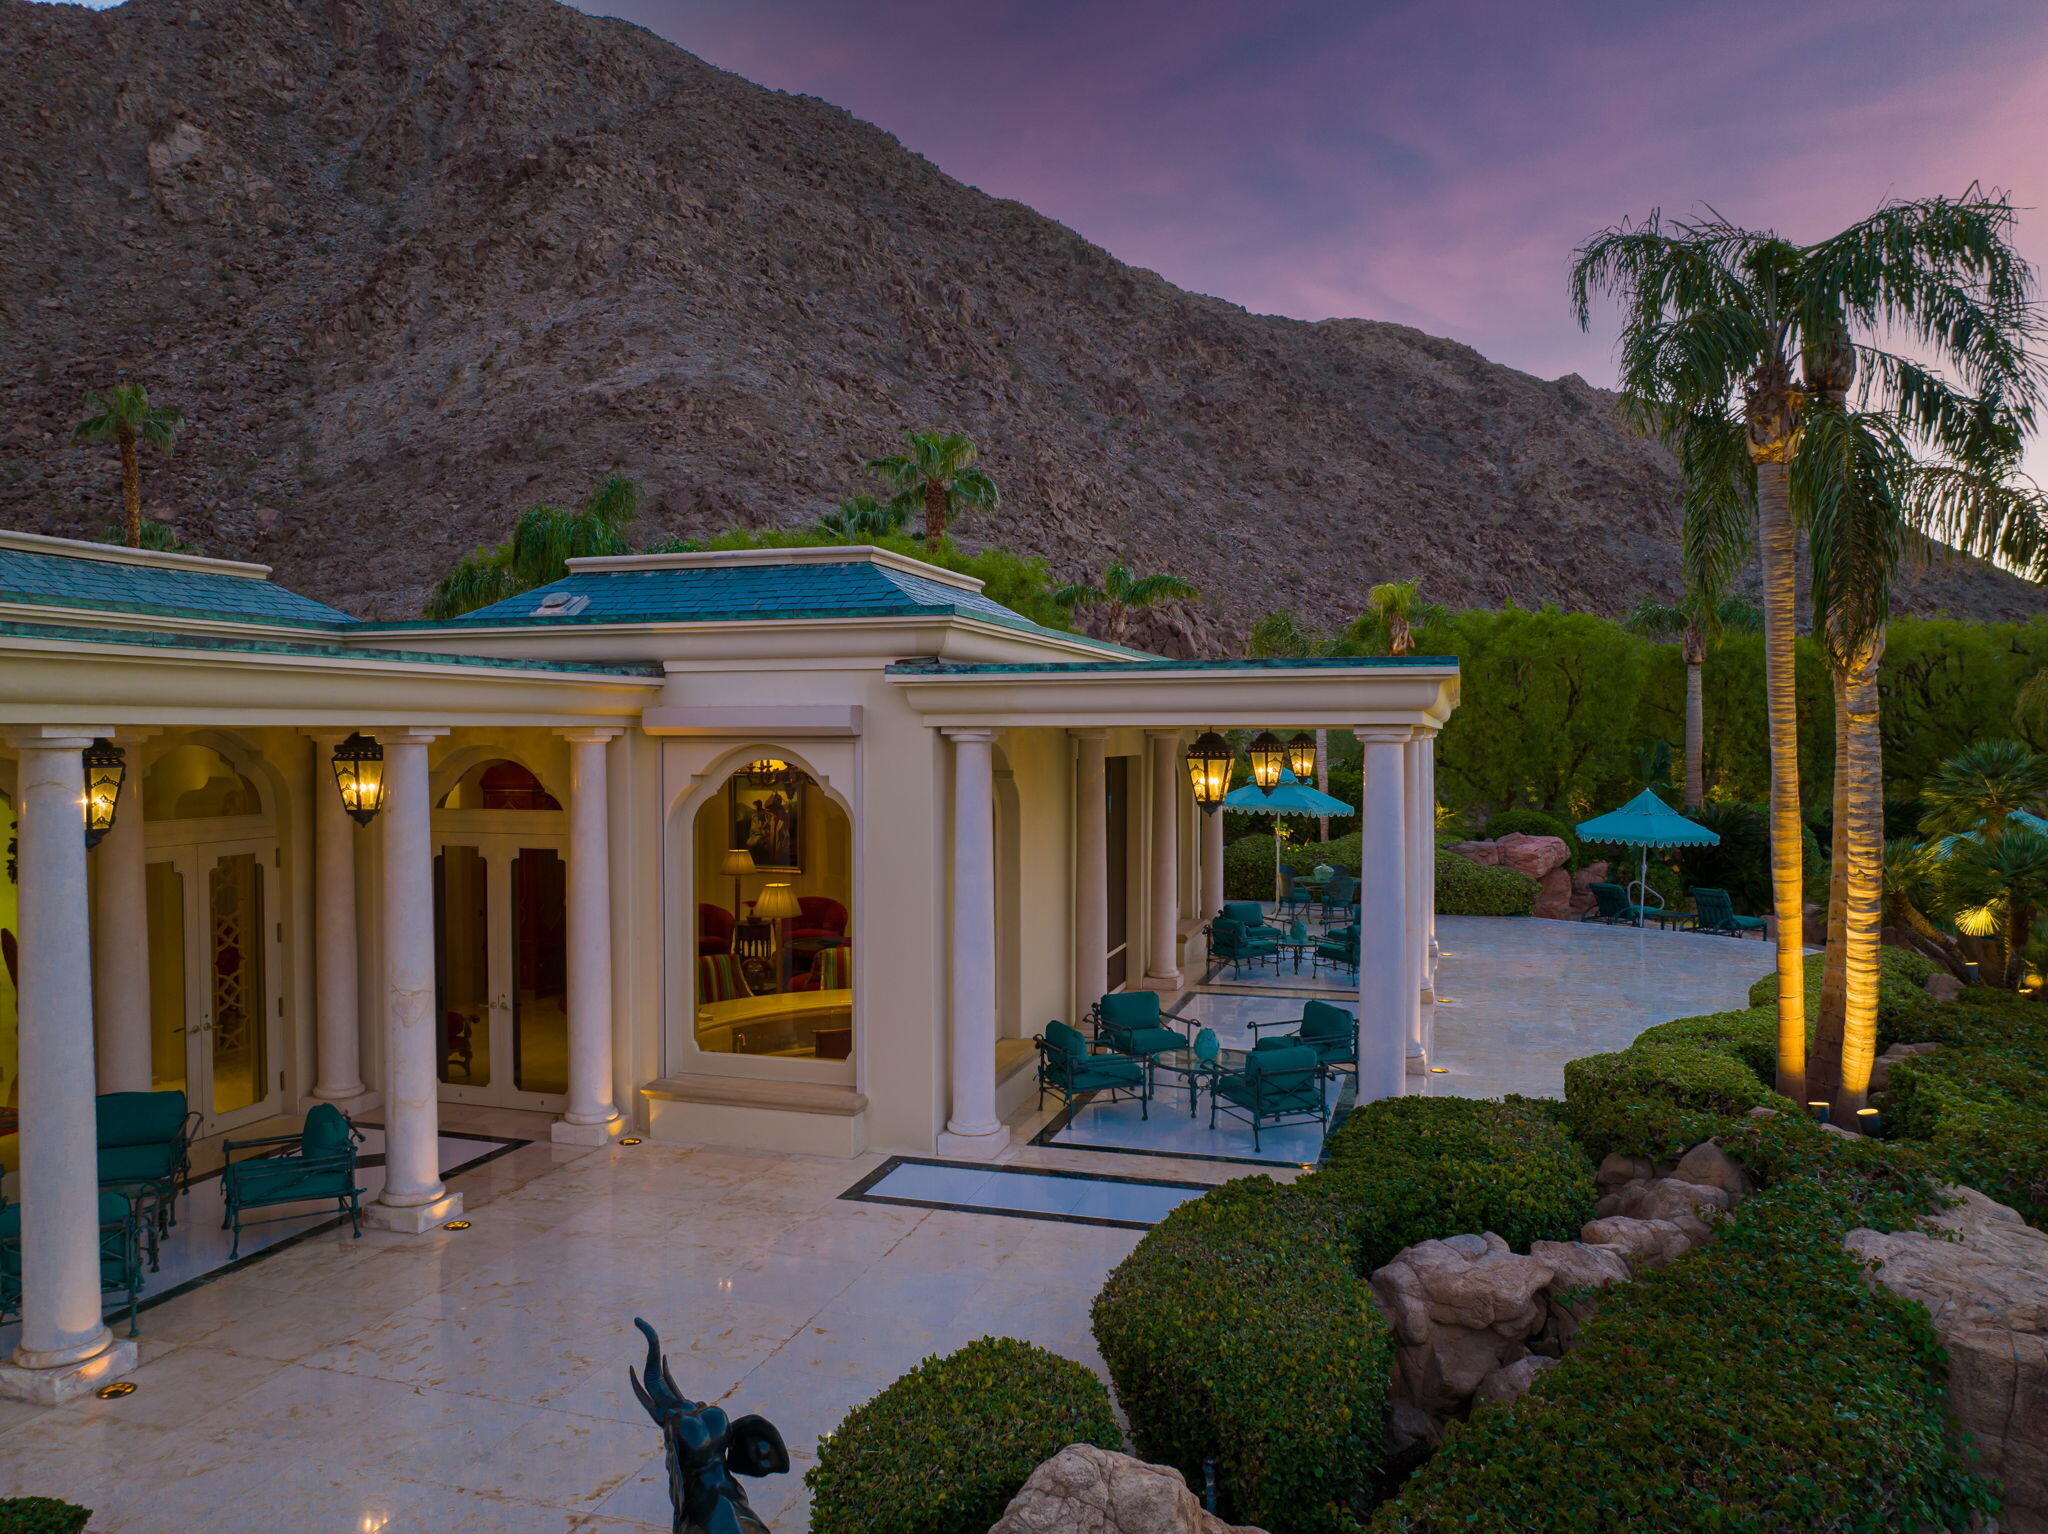 This extraordinary estate home exudes unyielded craftsmanship in its architectural design, construction elements and interior decor. The two-story residence was built by Gerry Langlois Construction under the watchful eyes of Beverly Hills architect, Bob Ray Offenhauser and decorator, John Cottrell. Its warm welcome greets you and your guests by echoing the epitome of desert living and entertainment. Located within the prestigious city of Indian Wells, California, this creatively positioned home sits along the gold coast of The Vintage Club offering commanding views of the 17th Hole of the Mountain Course boasting lush fairways, meandering lakes with waterfalls and the valley's surrounding mountain ranges. Through years of purchasing furnishings abroad, each room is a study of resplendent taste. An entertainer's paradise, the splendid columned patio areas can accommodate nearly a hundred guests for dining amid unparalleled views. The surrounding landscape is kept at perfection and the lagoon-style swimming pool with rock-cropped waterfall is set away from the main residence offering privacy and a personal sense of swimming in a crystal-clear lake. Consider the obtainable experiences of this unique residence and embrace the ultimate lifestyle of excellence.